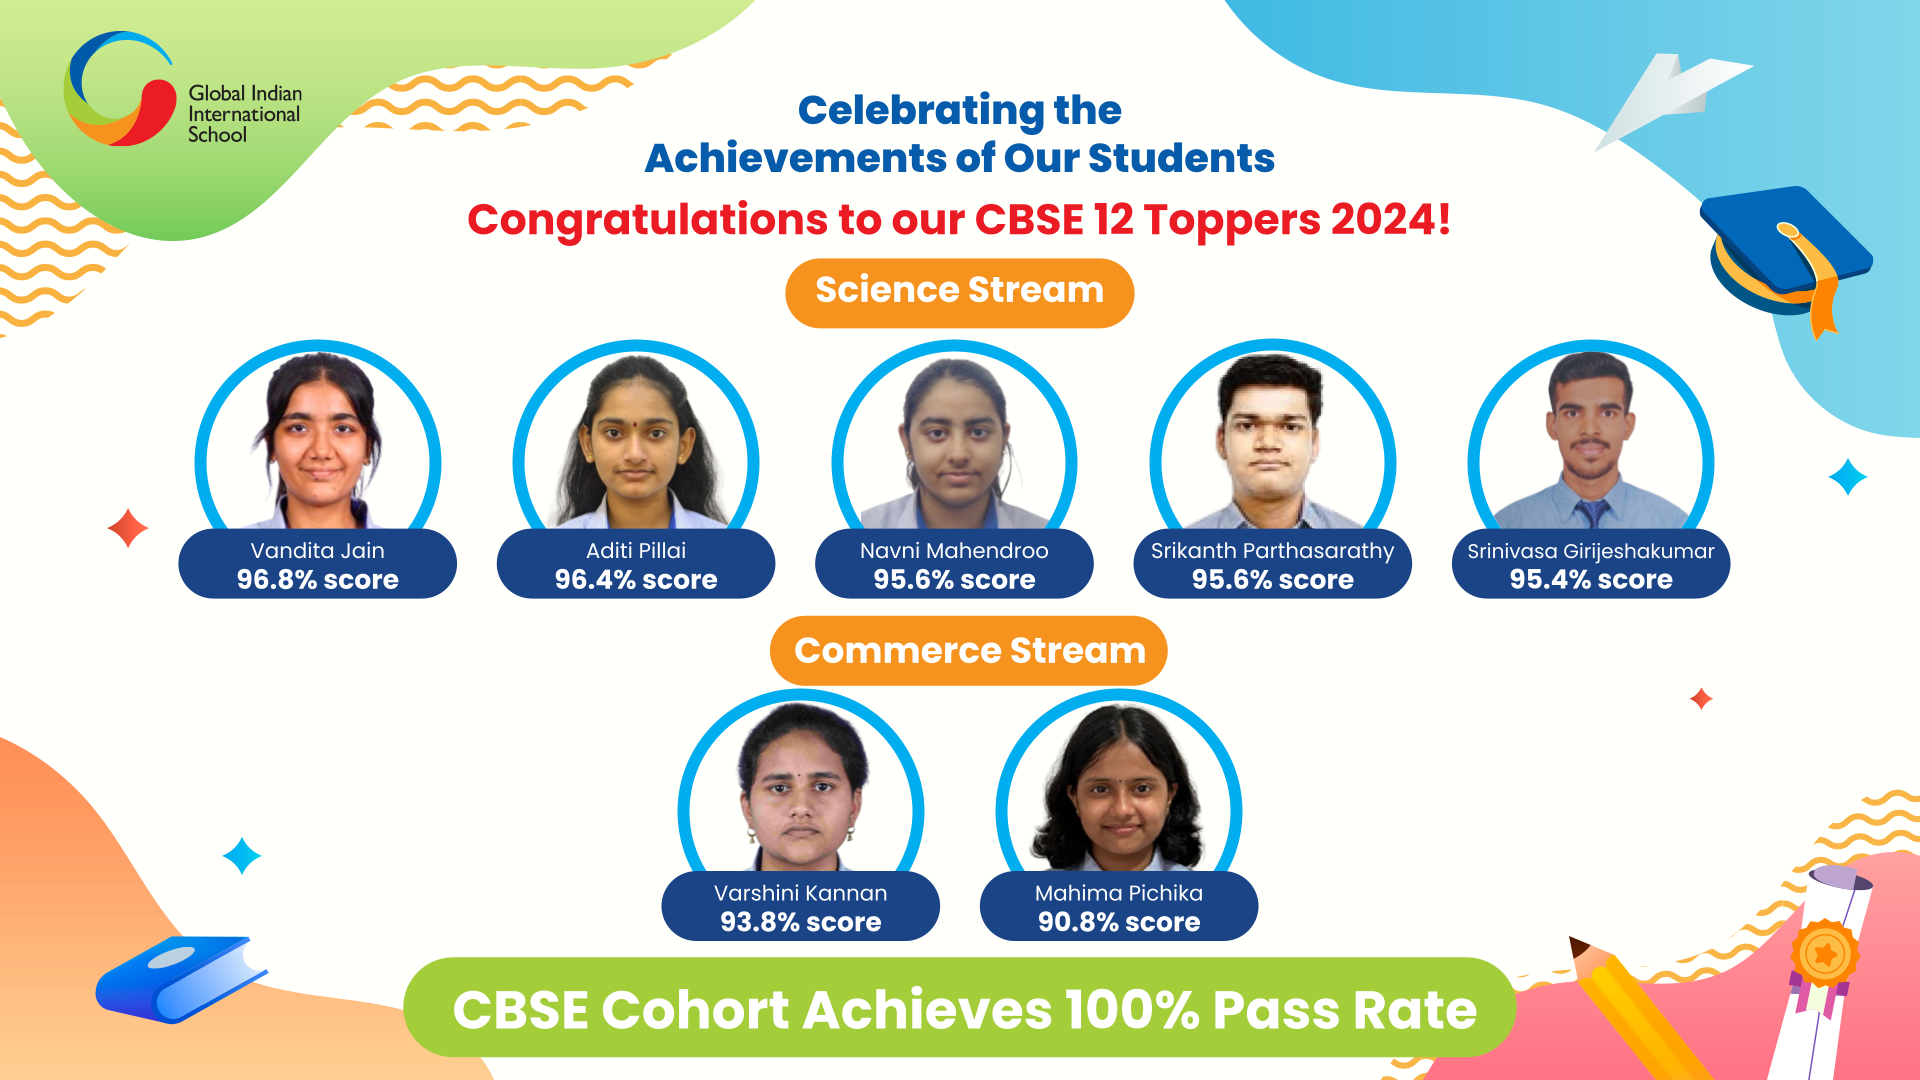 GIIS KL Celebrates Academic Excellence: Students Achieve Stellar Results in CBSE Class 12 Exams